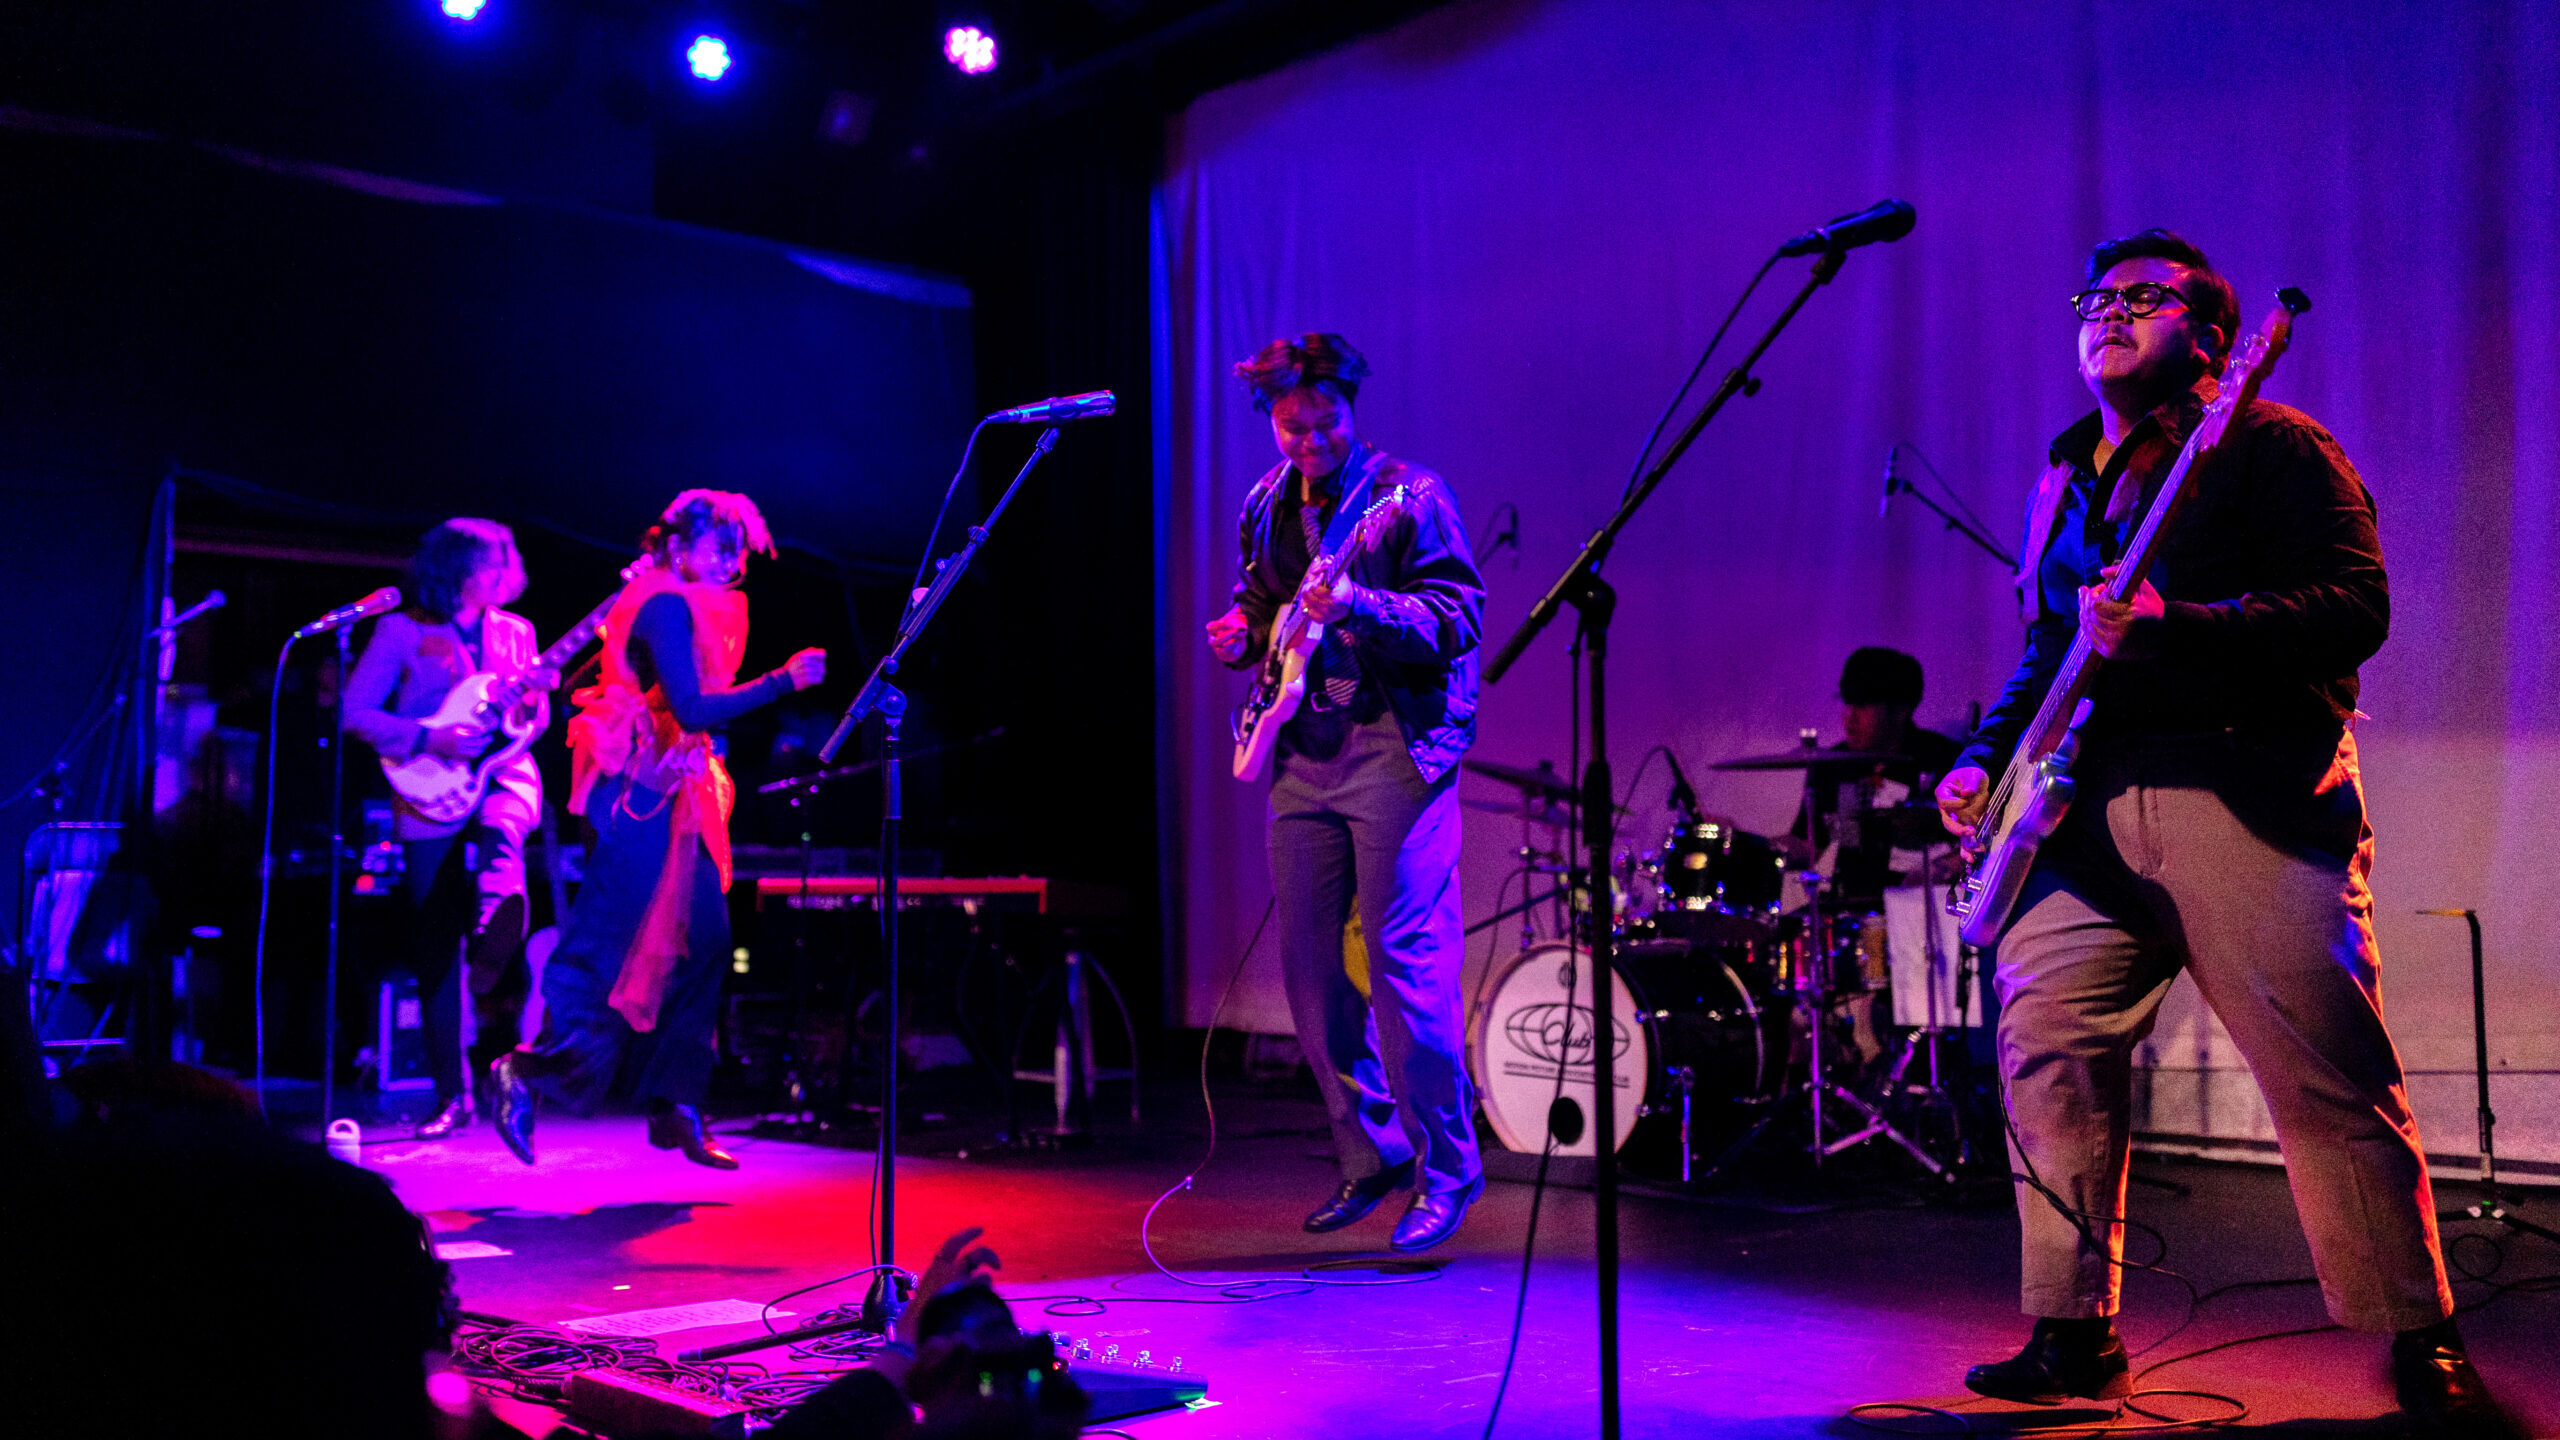 (from left to right) Reality Club band members Fathia “Chia'' Izzati, vocalist and keys, her brother, Faiz Novascotia Saripudin, guitarist and vocalist, Era Patigo, drummer, and Nugi Wicaksono, bass, play under purple and blue lights at the Music Hall of Williamsburg.